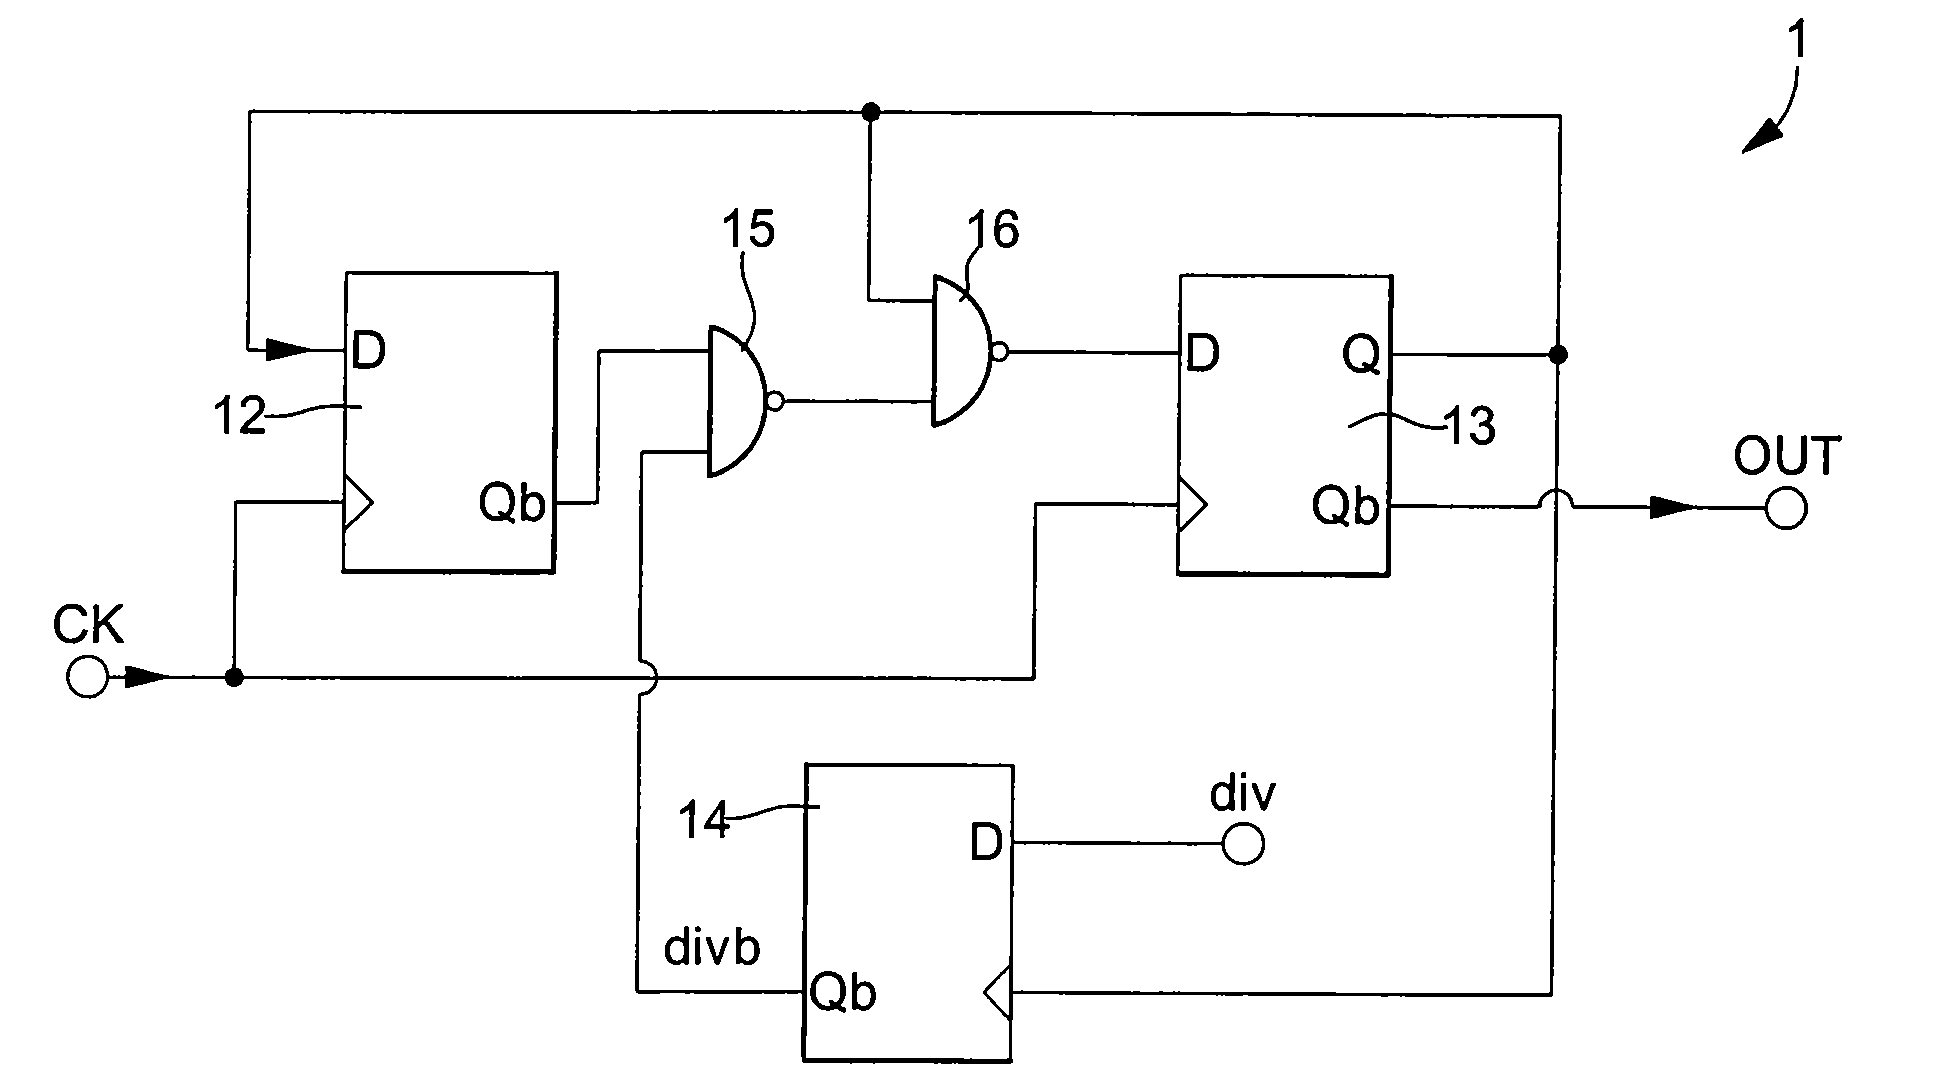 Dual-modulus prescaler circuit operating at a very high frequency